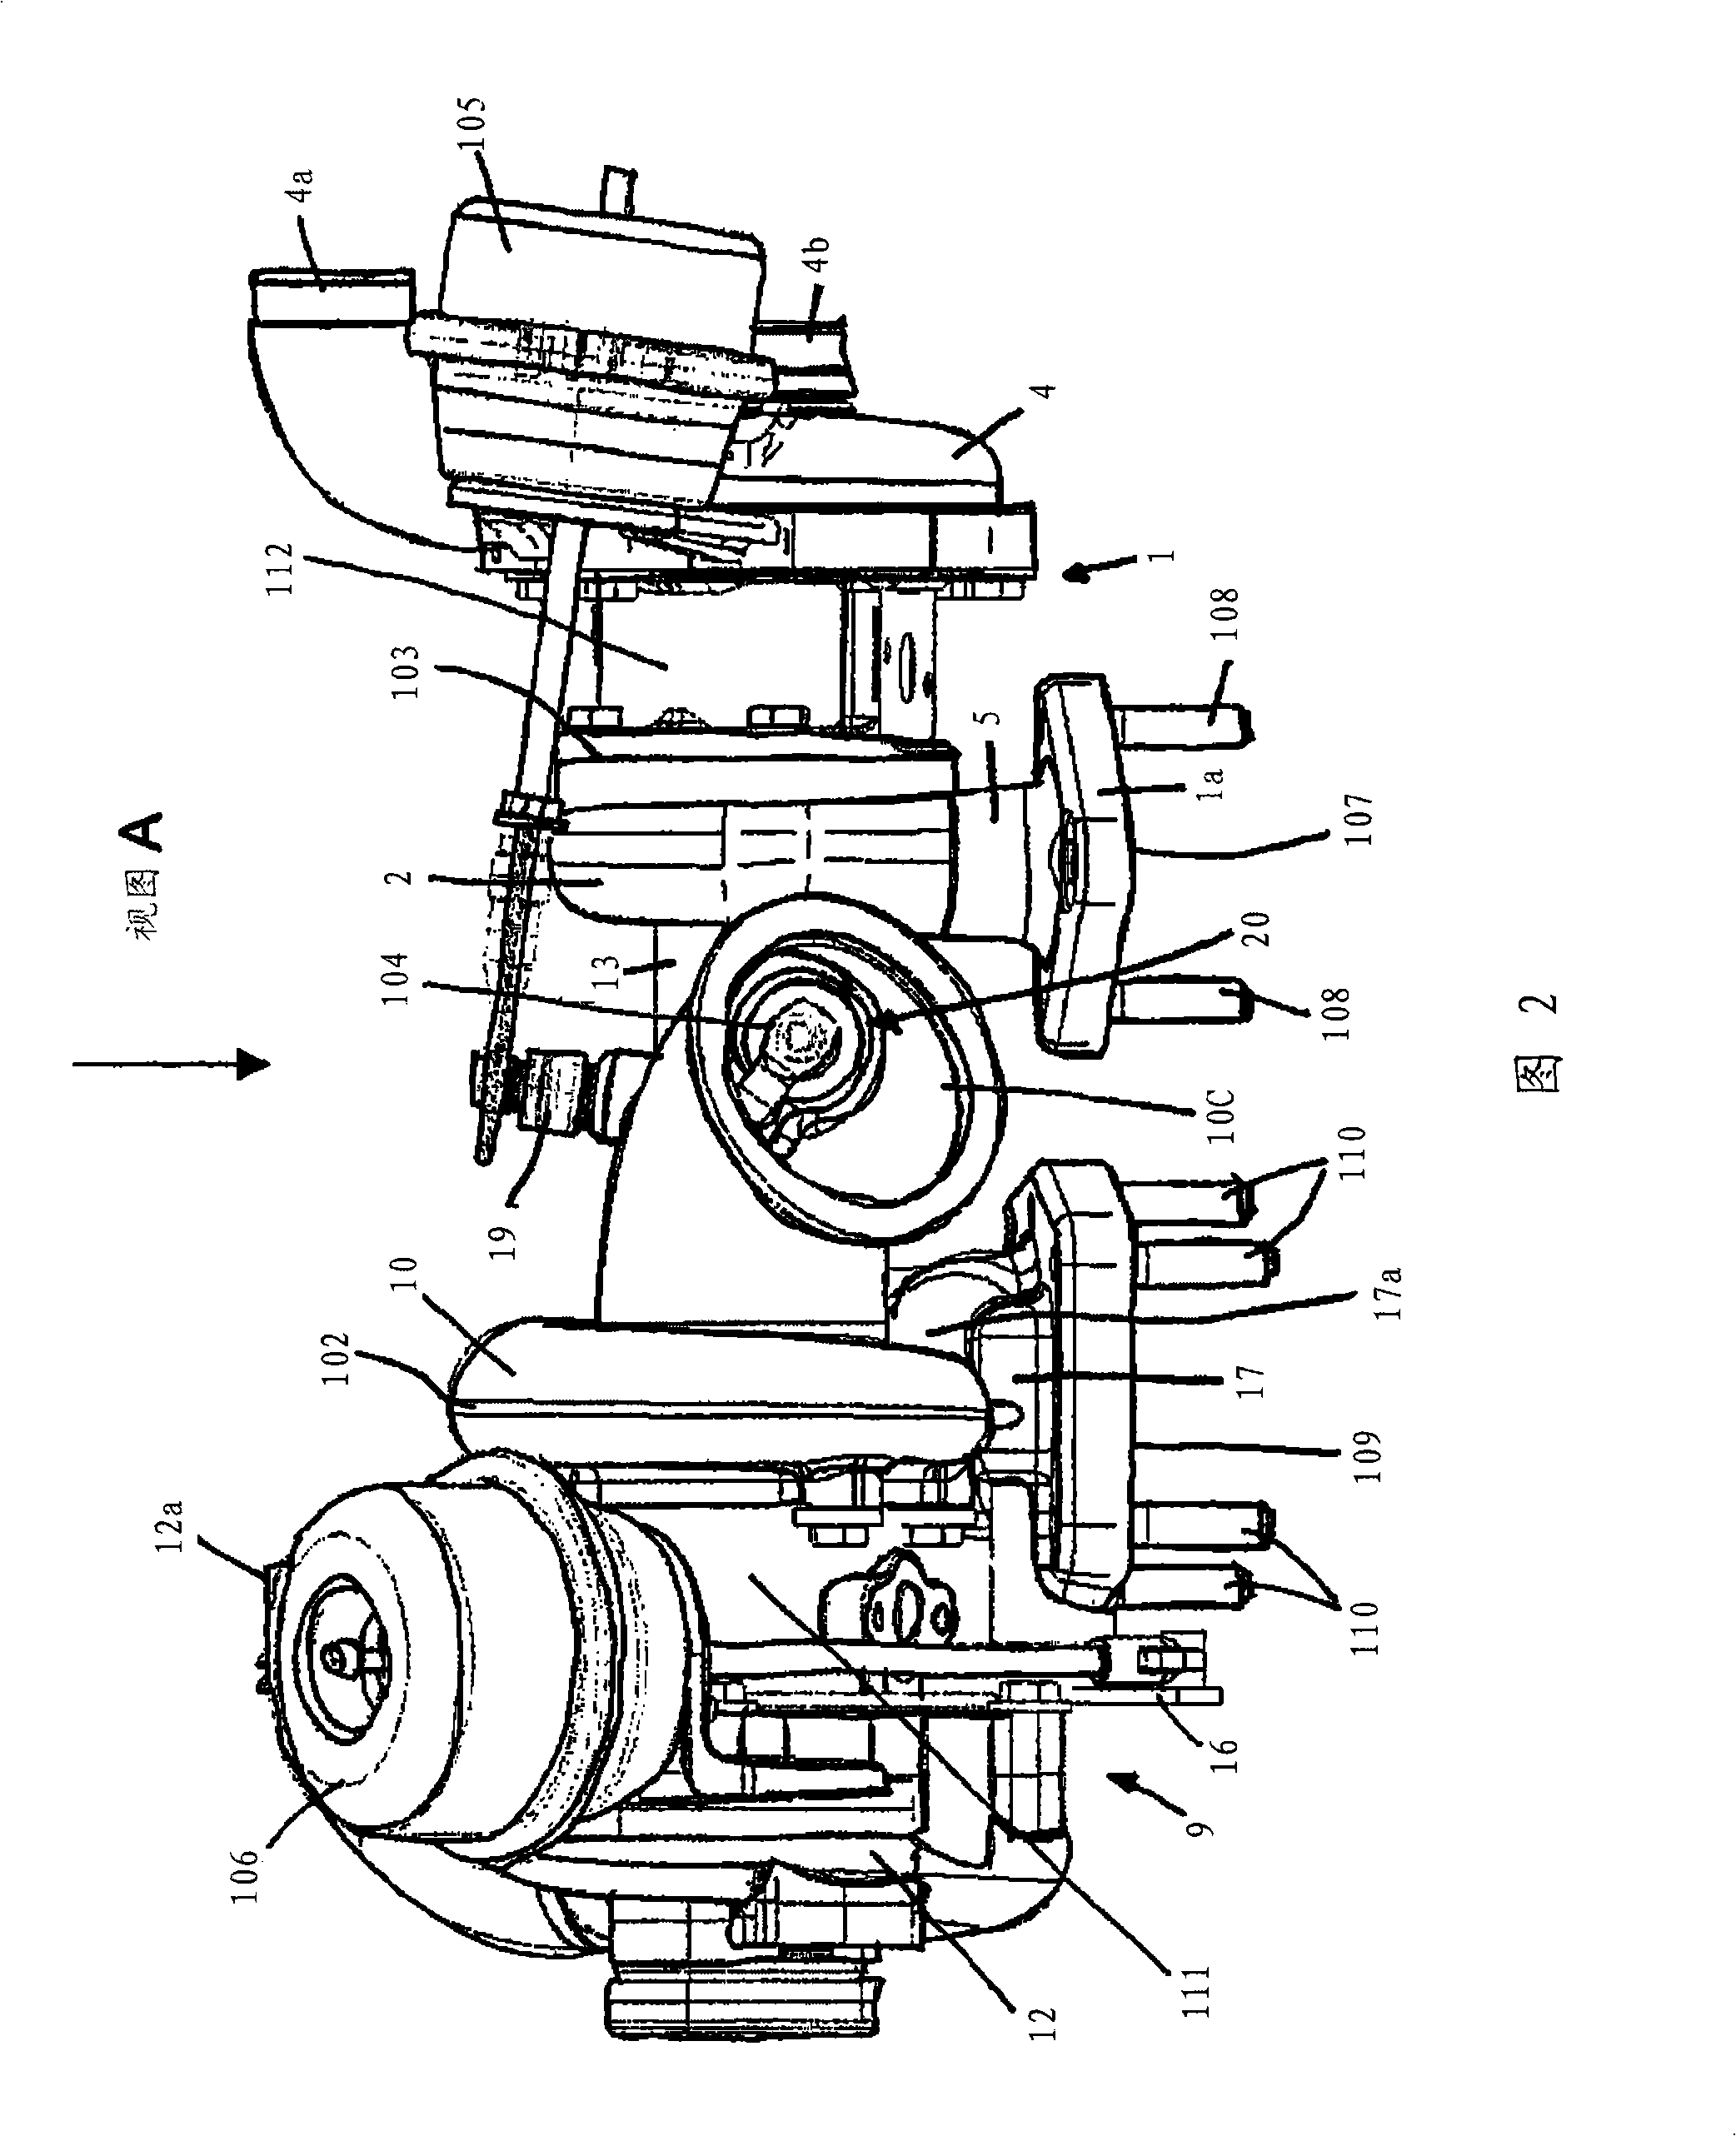 Two-stage turbo-charger engine system